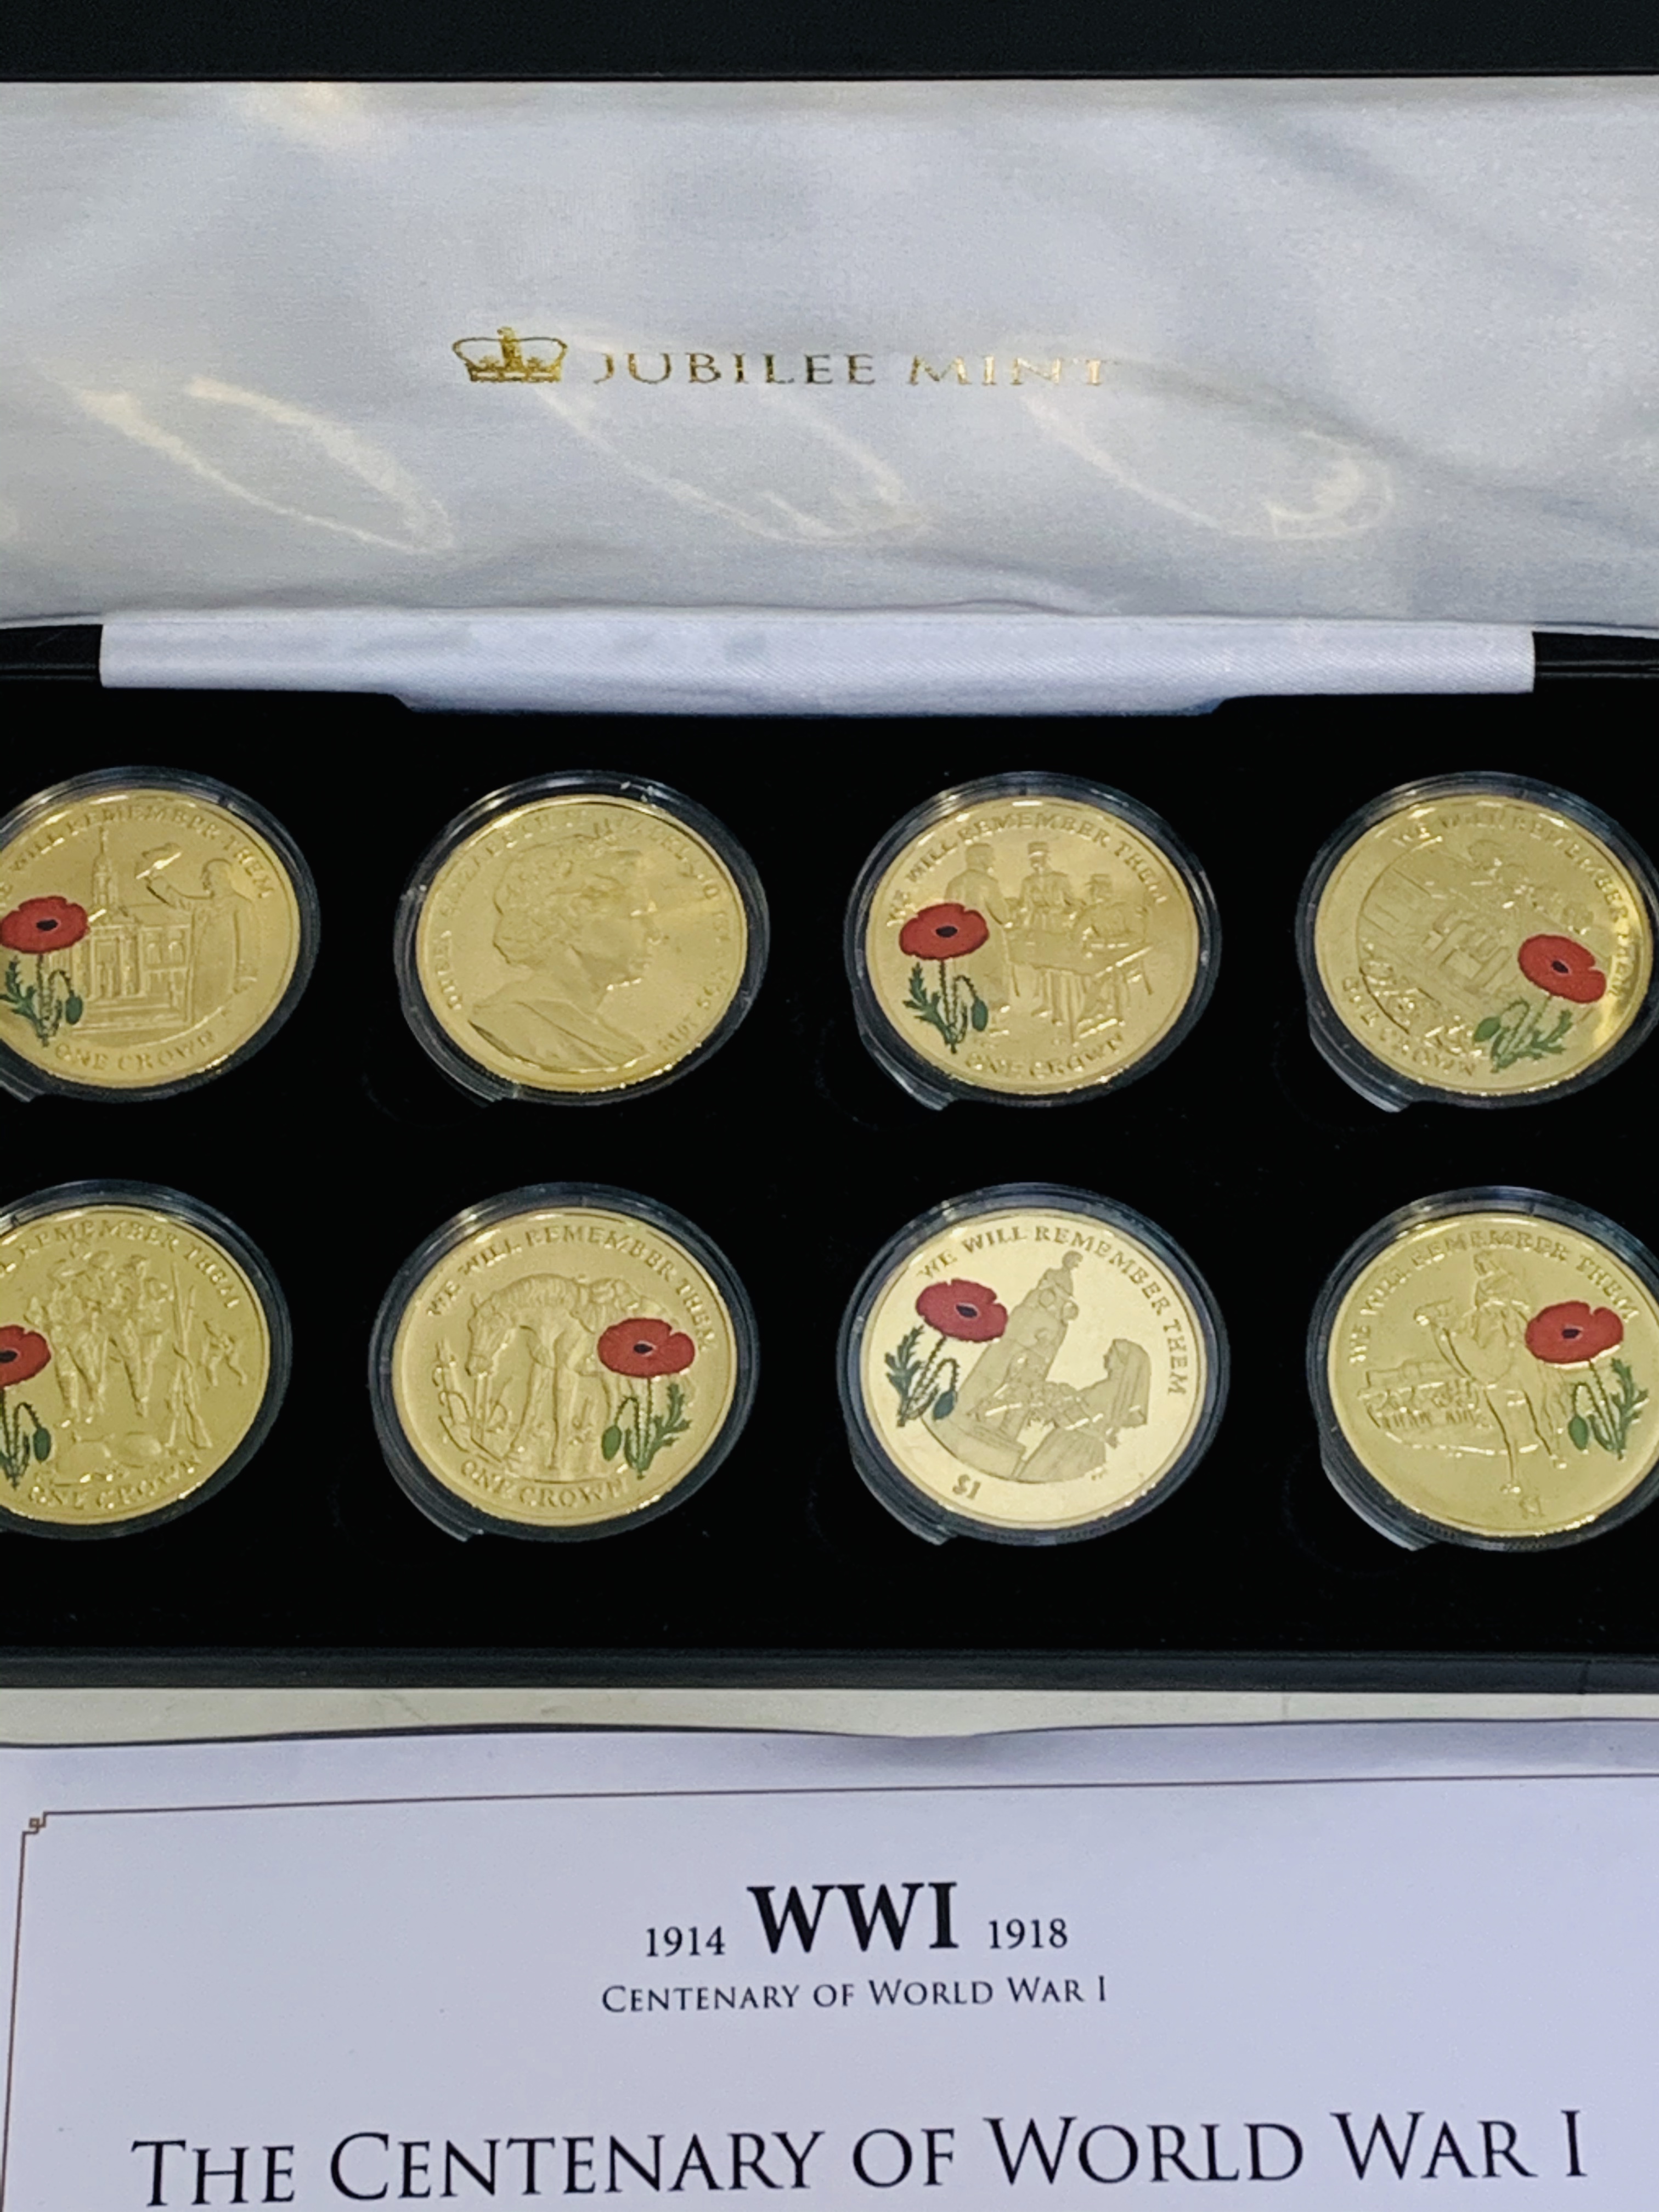 Jubilee Mint 24K gold plated coin collection “The Centenary of World War 1” - Image 2 of 2